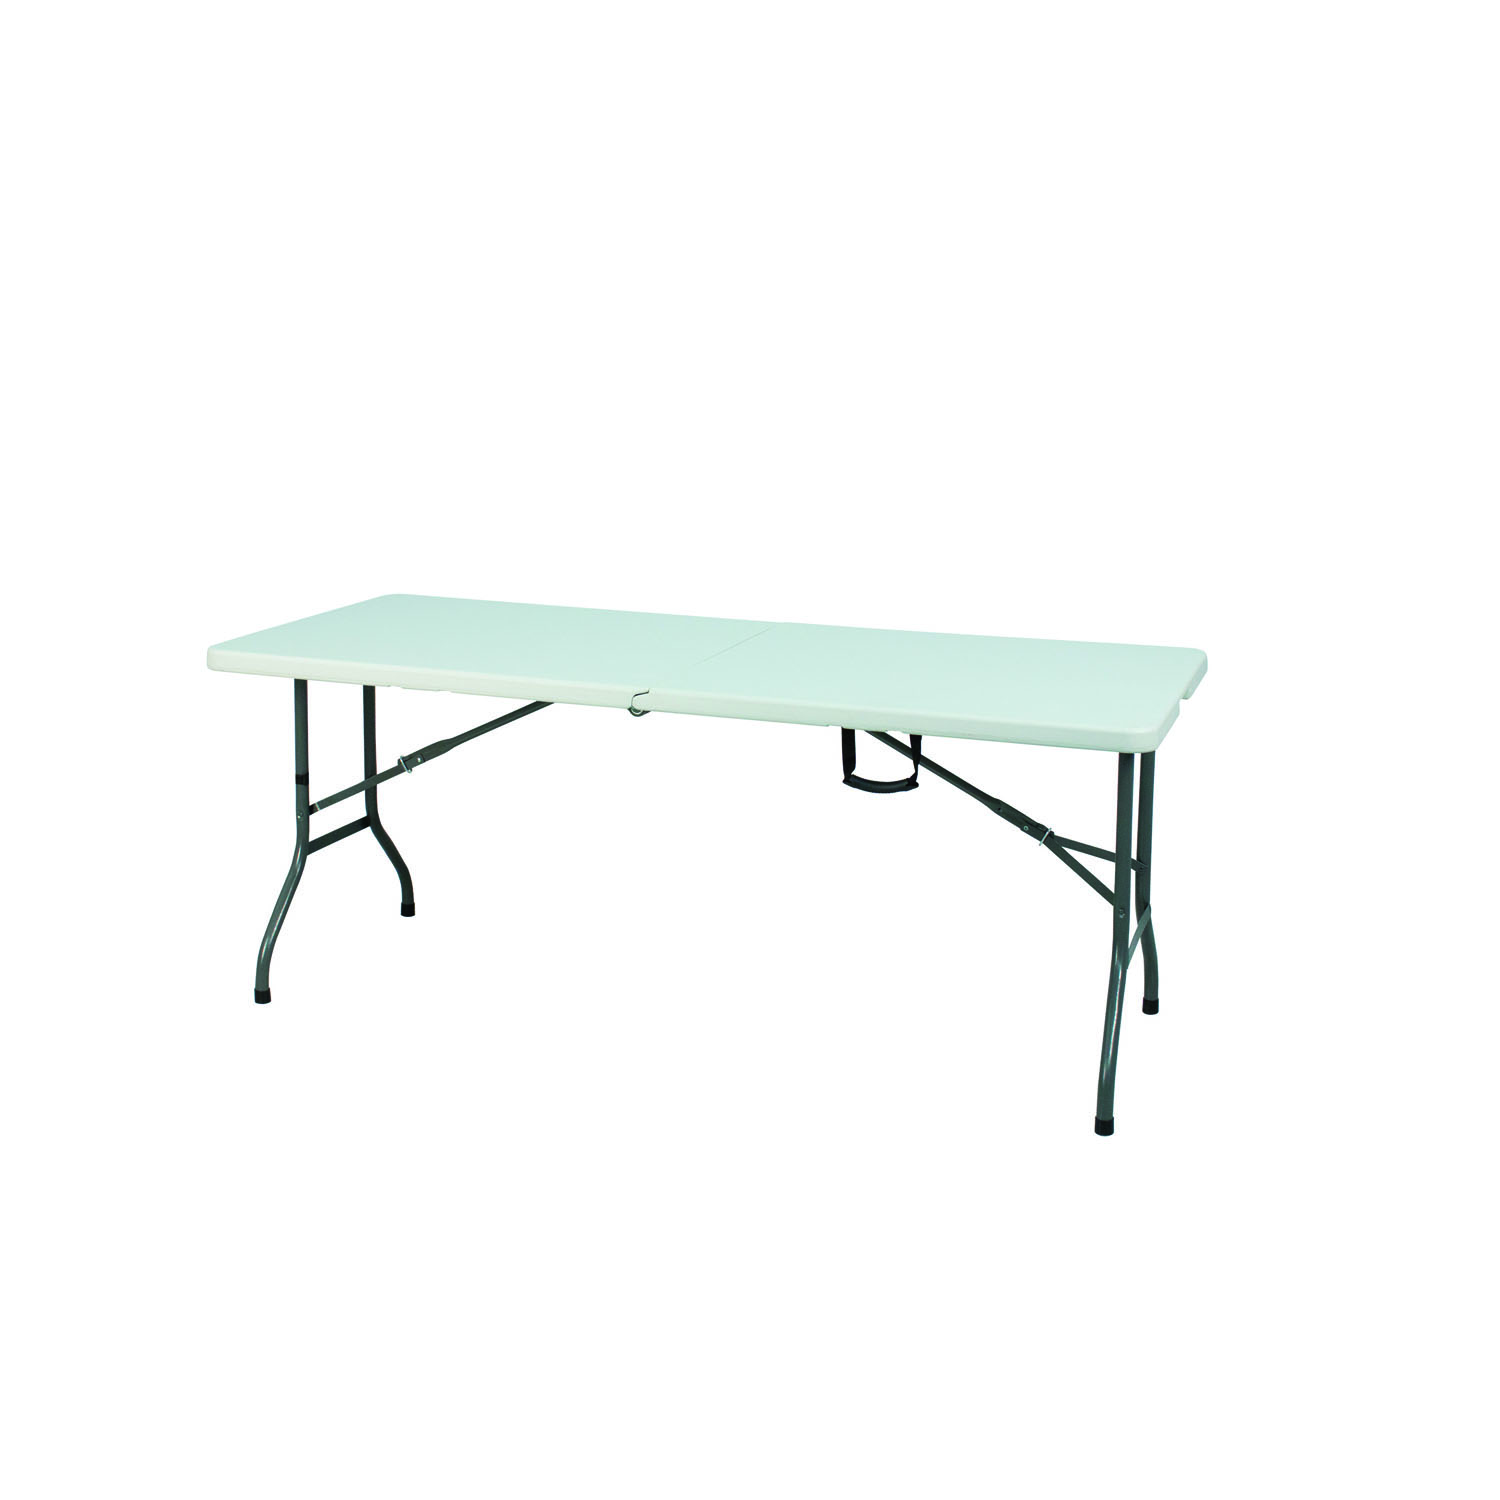 Folding Table - Very Displays